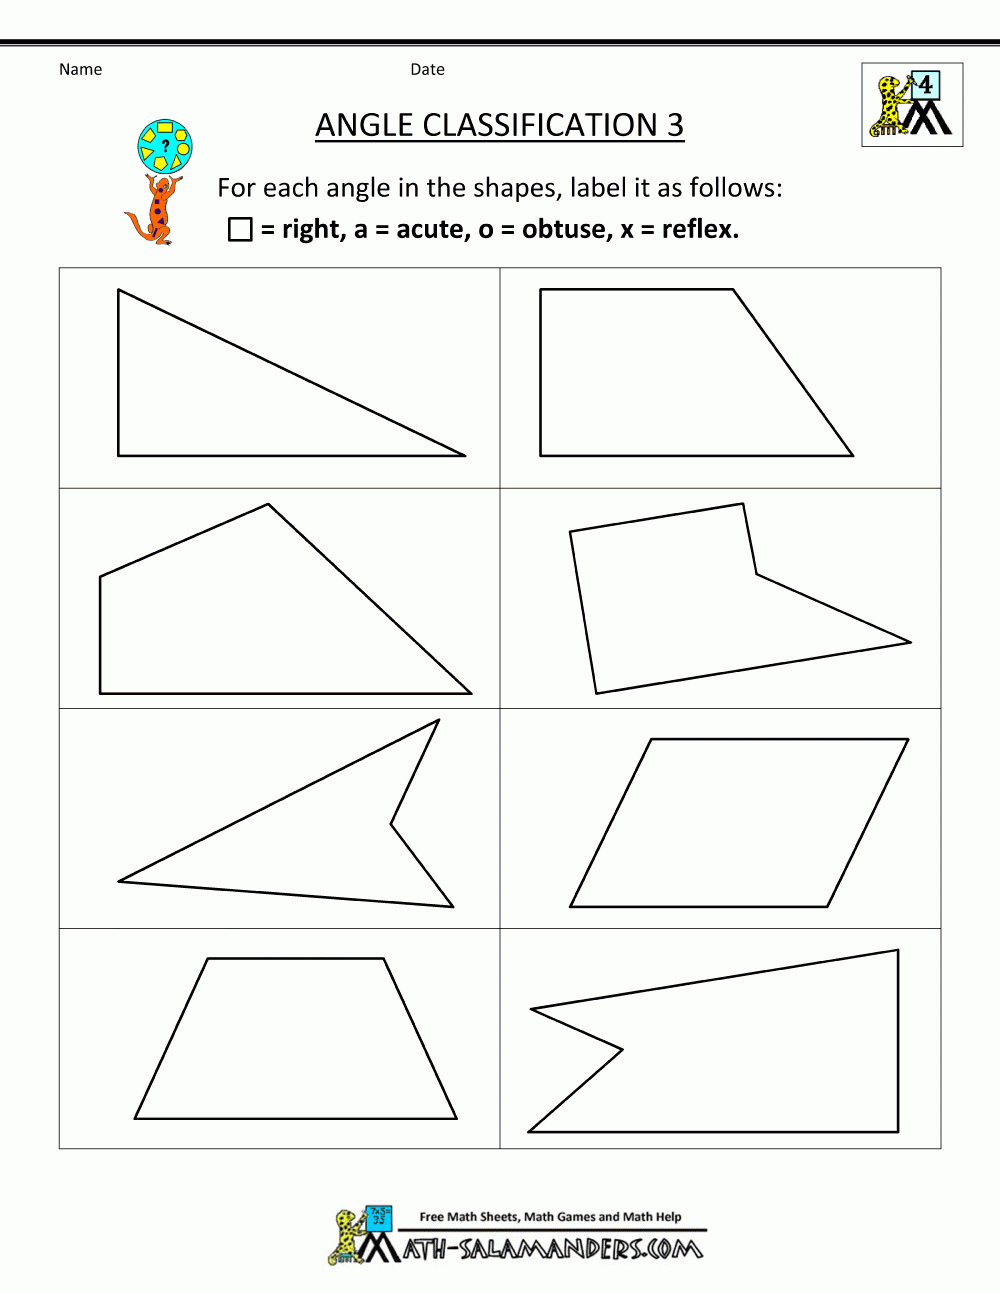 free-printable-math-worksheets-for-4th-grade-angles-math-worksheets-angles-geometry-worksheets